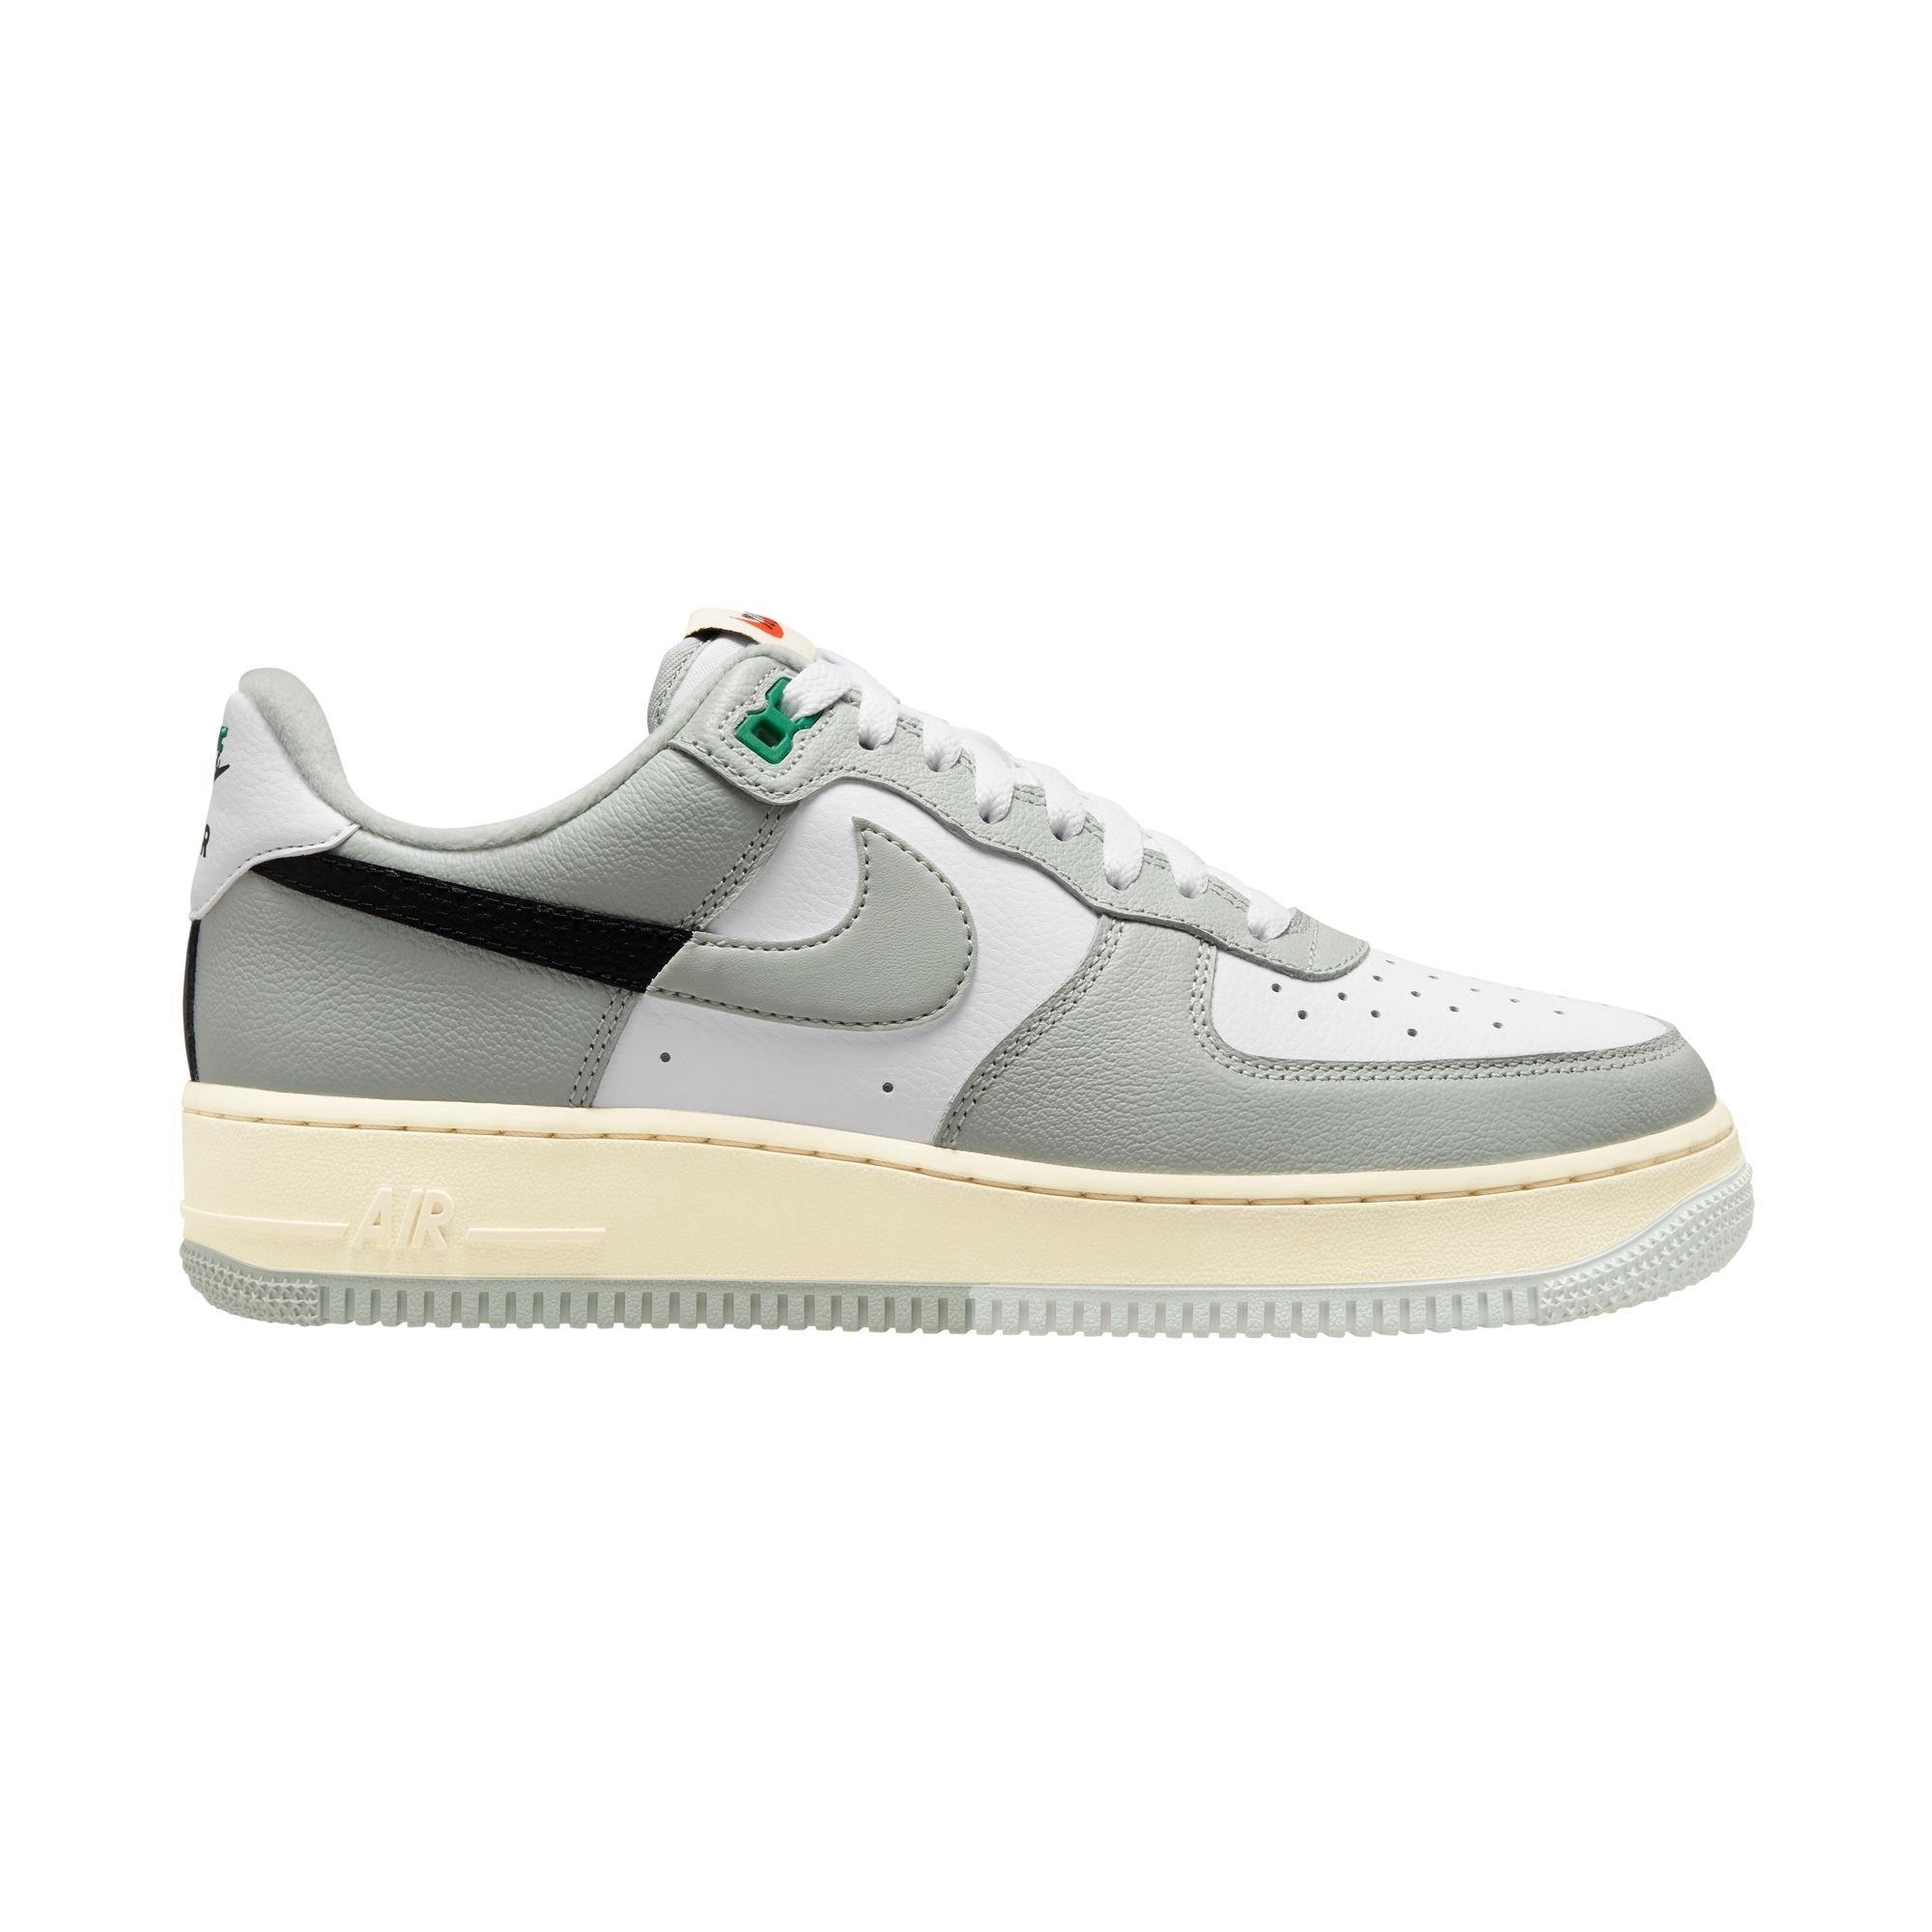 Size 9.5 - Nike Air Force 1 Low Remix Black (Used)